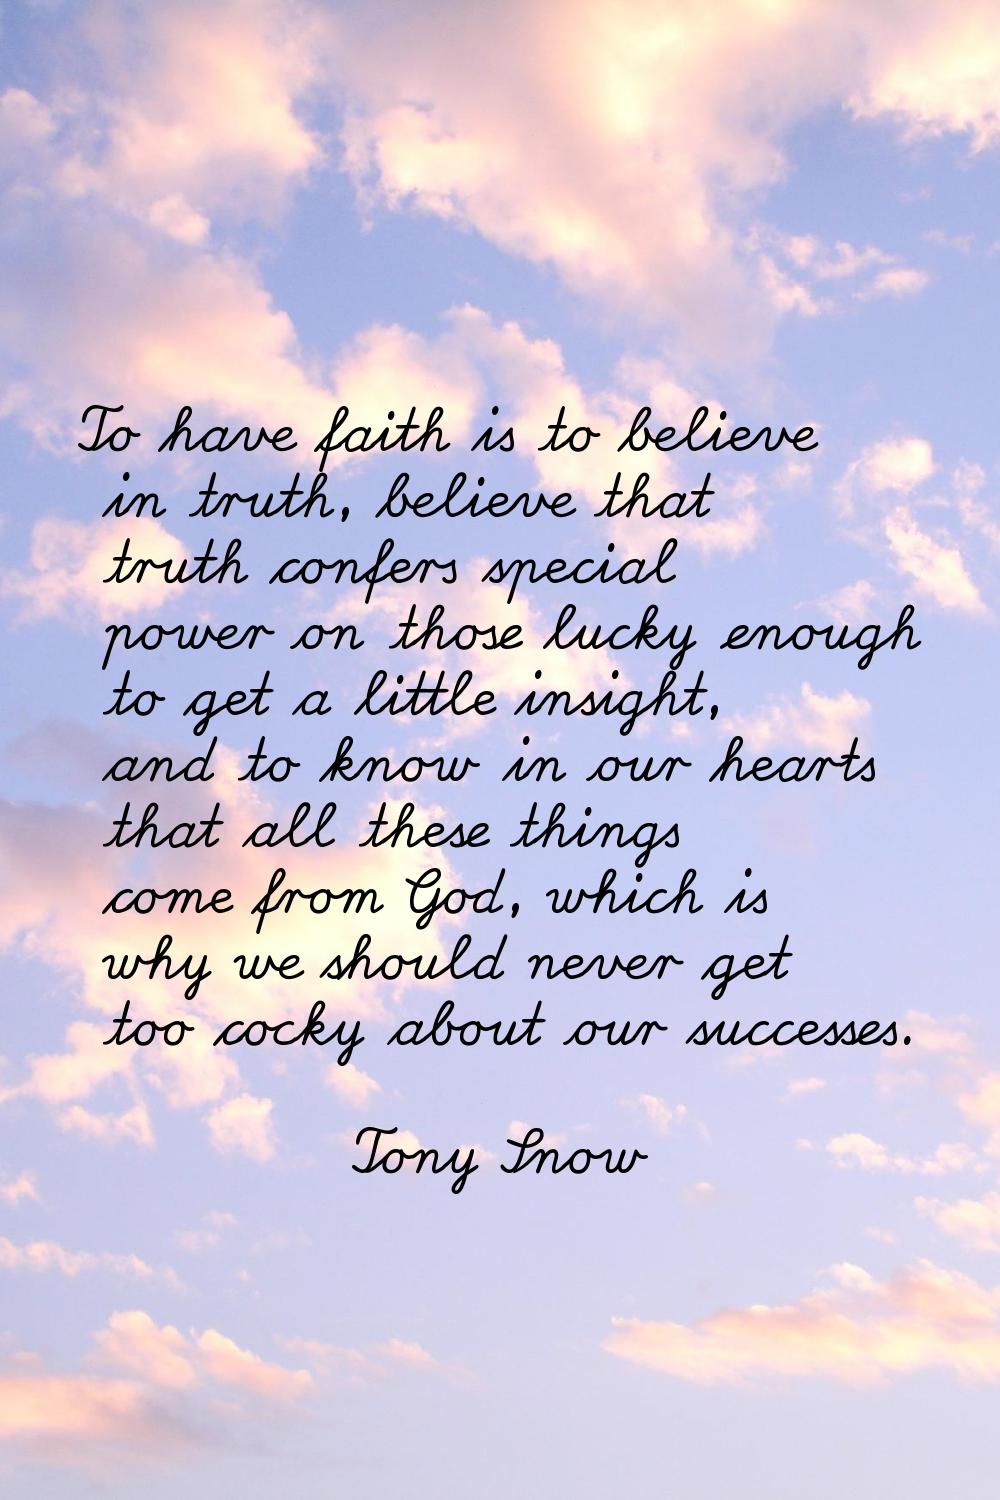 To have faith is to believe in truth, believe that truth confers special power on those lucky enoug